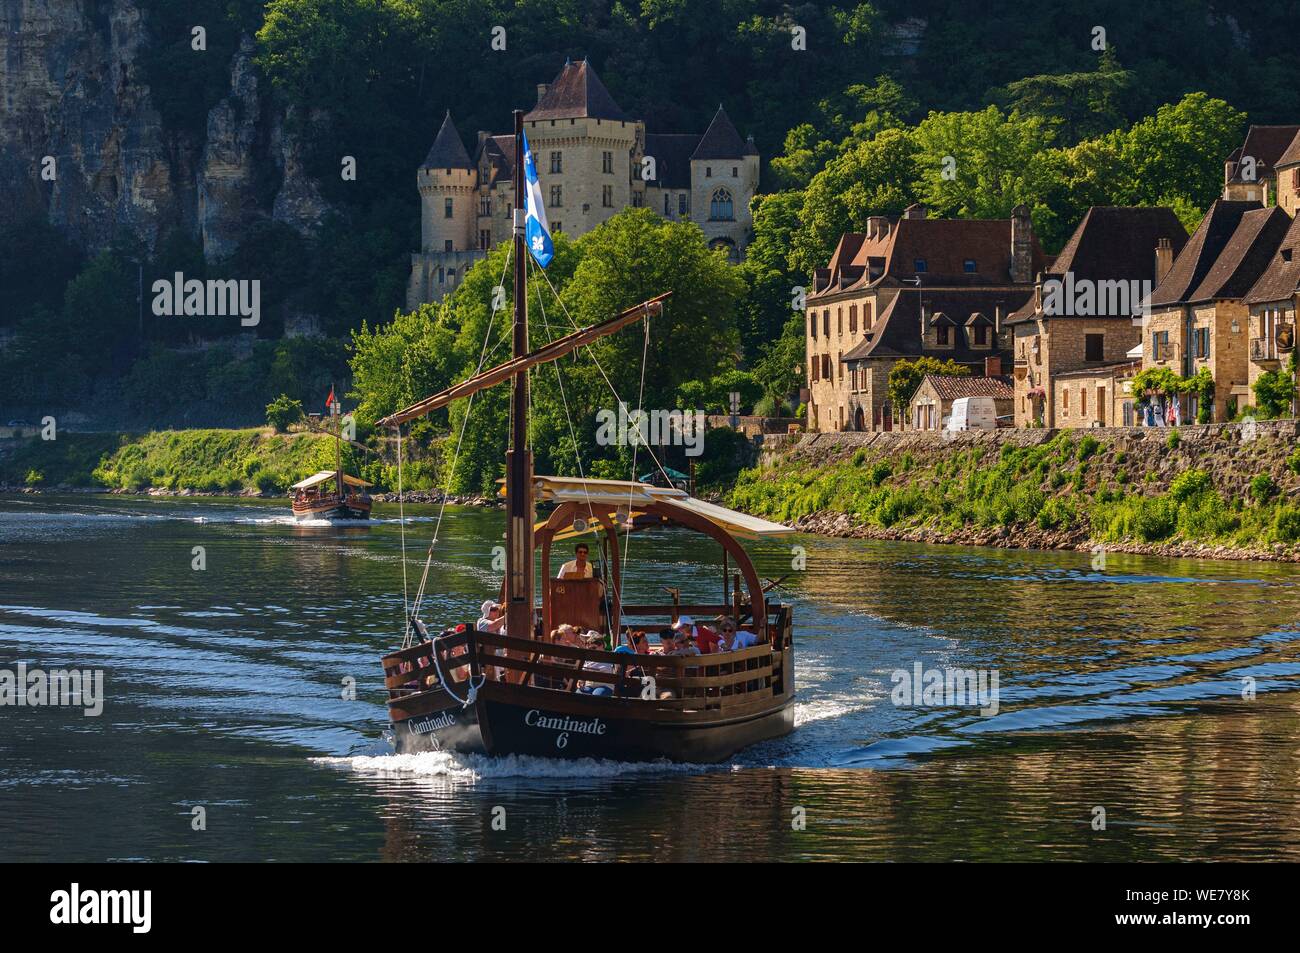 France, Dordogne, La Roque Gageac, tourists aboard a traditional boat on the Dordogne river Stock Photo